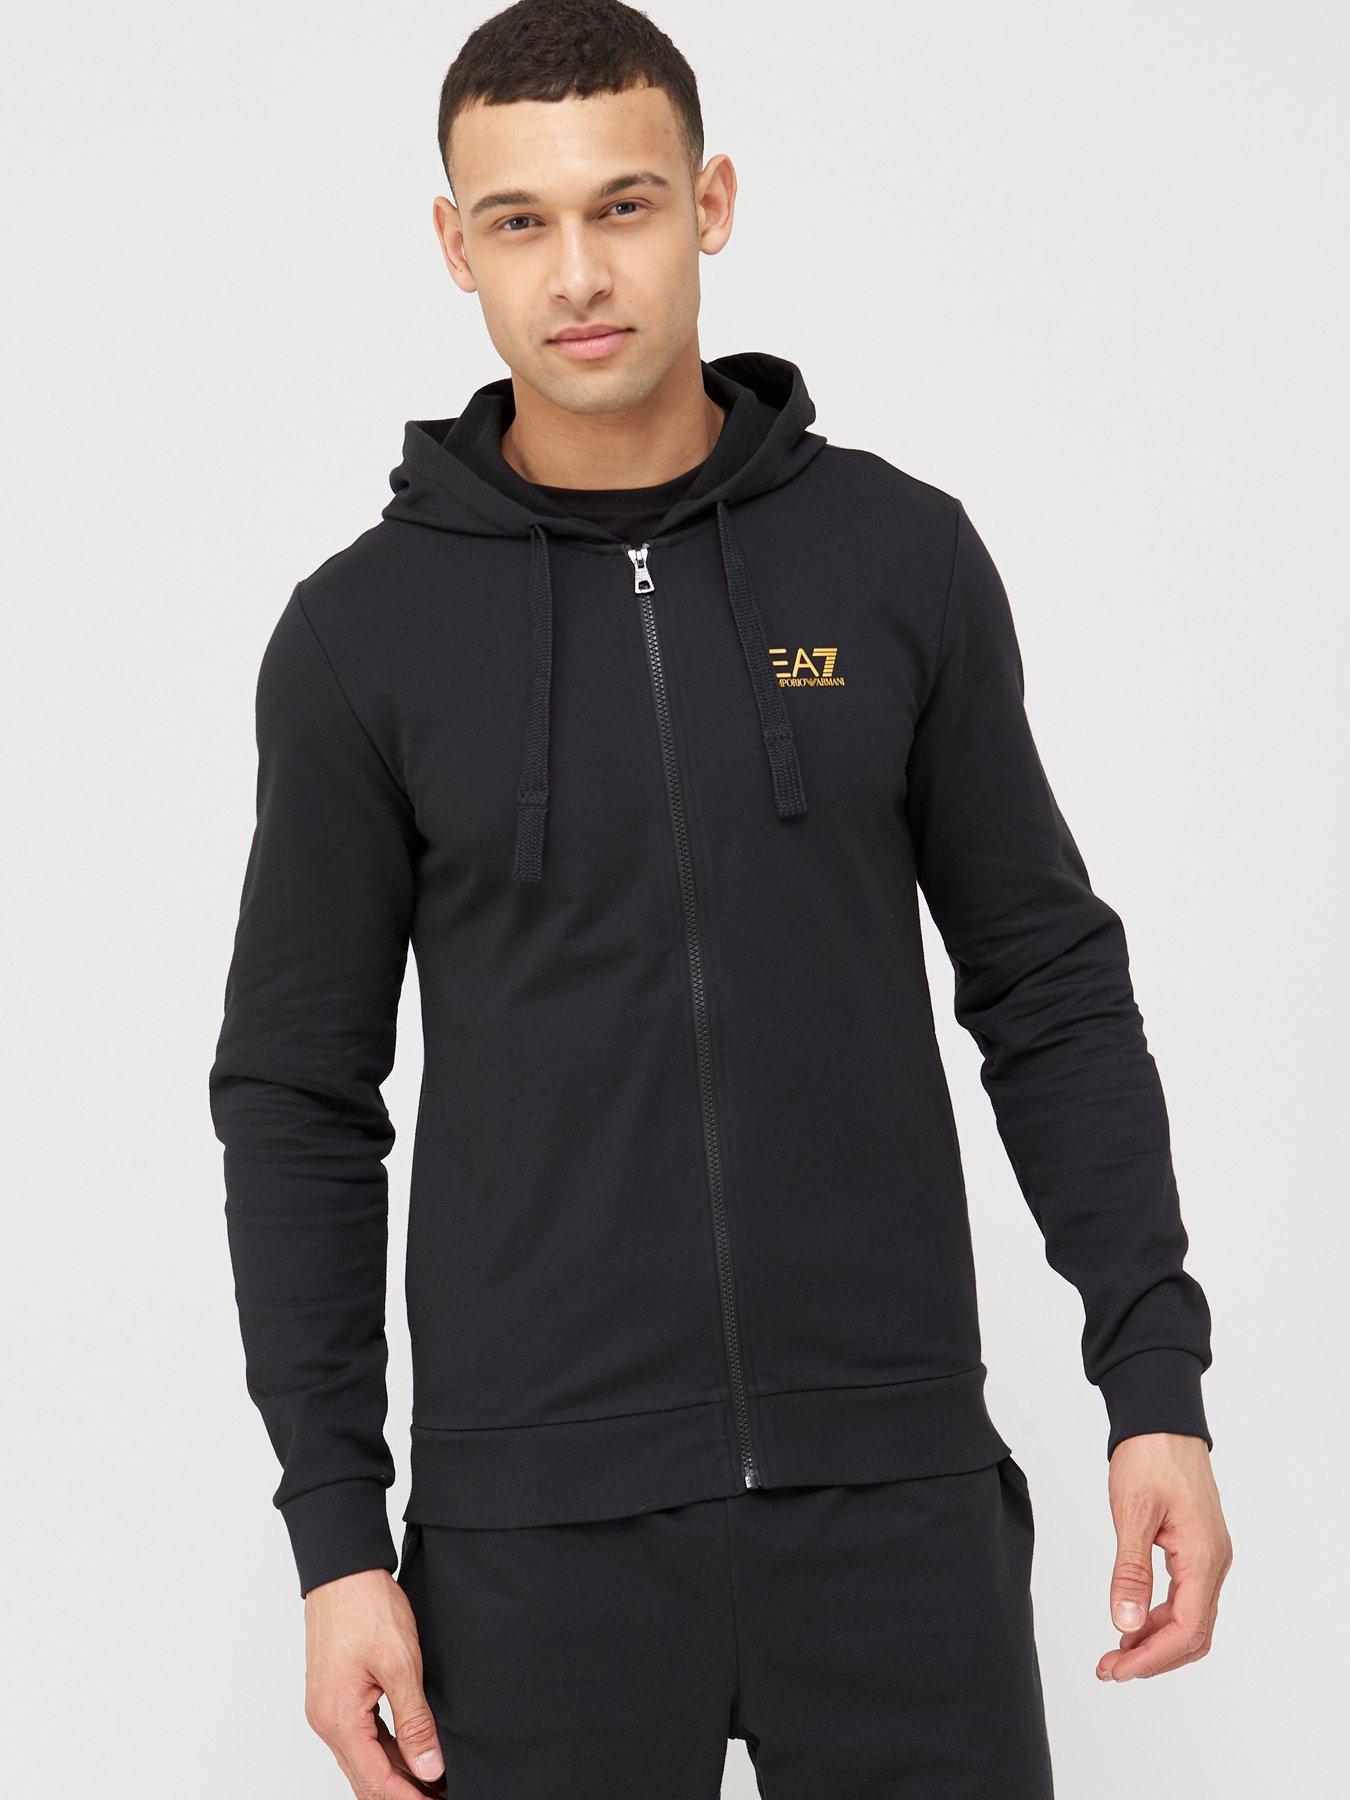 armani black and gold tracksuit